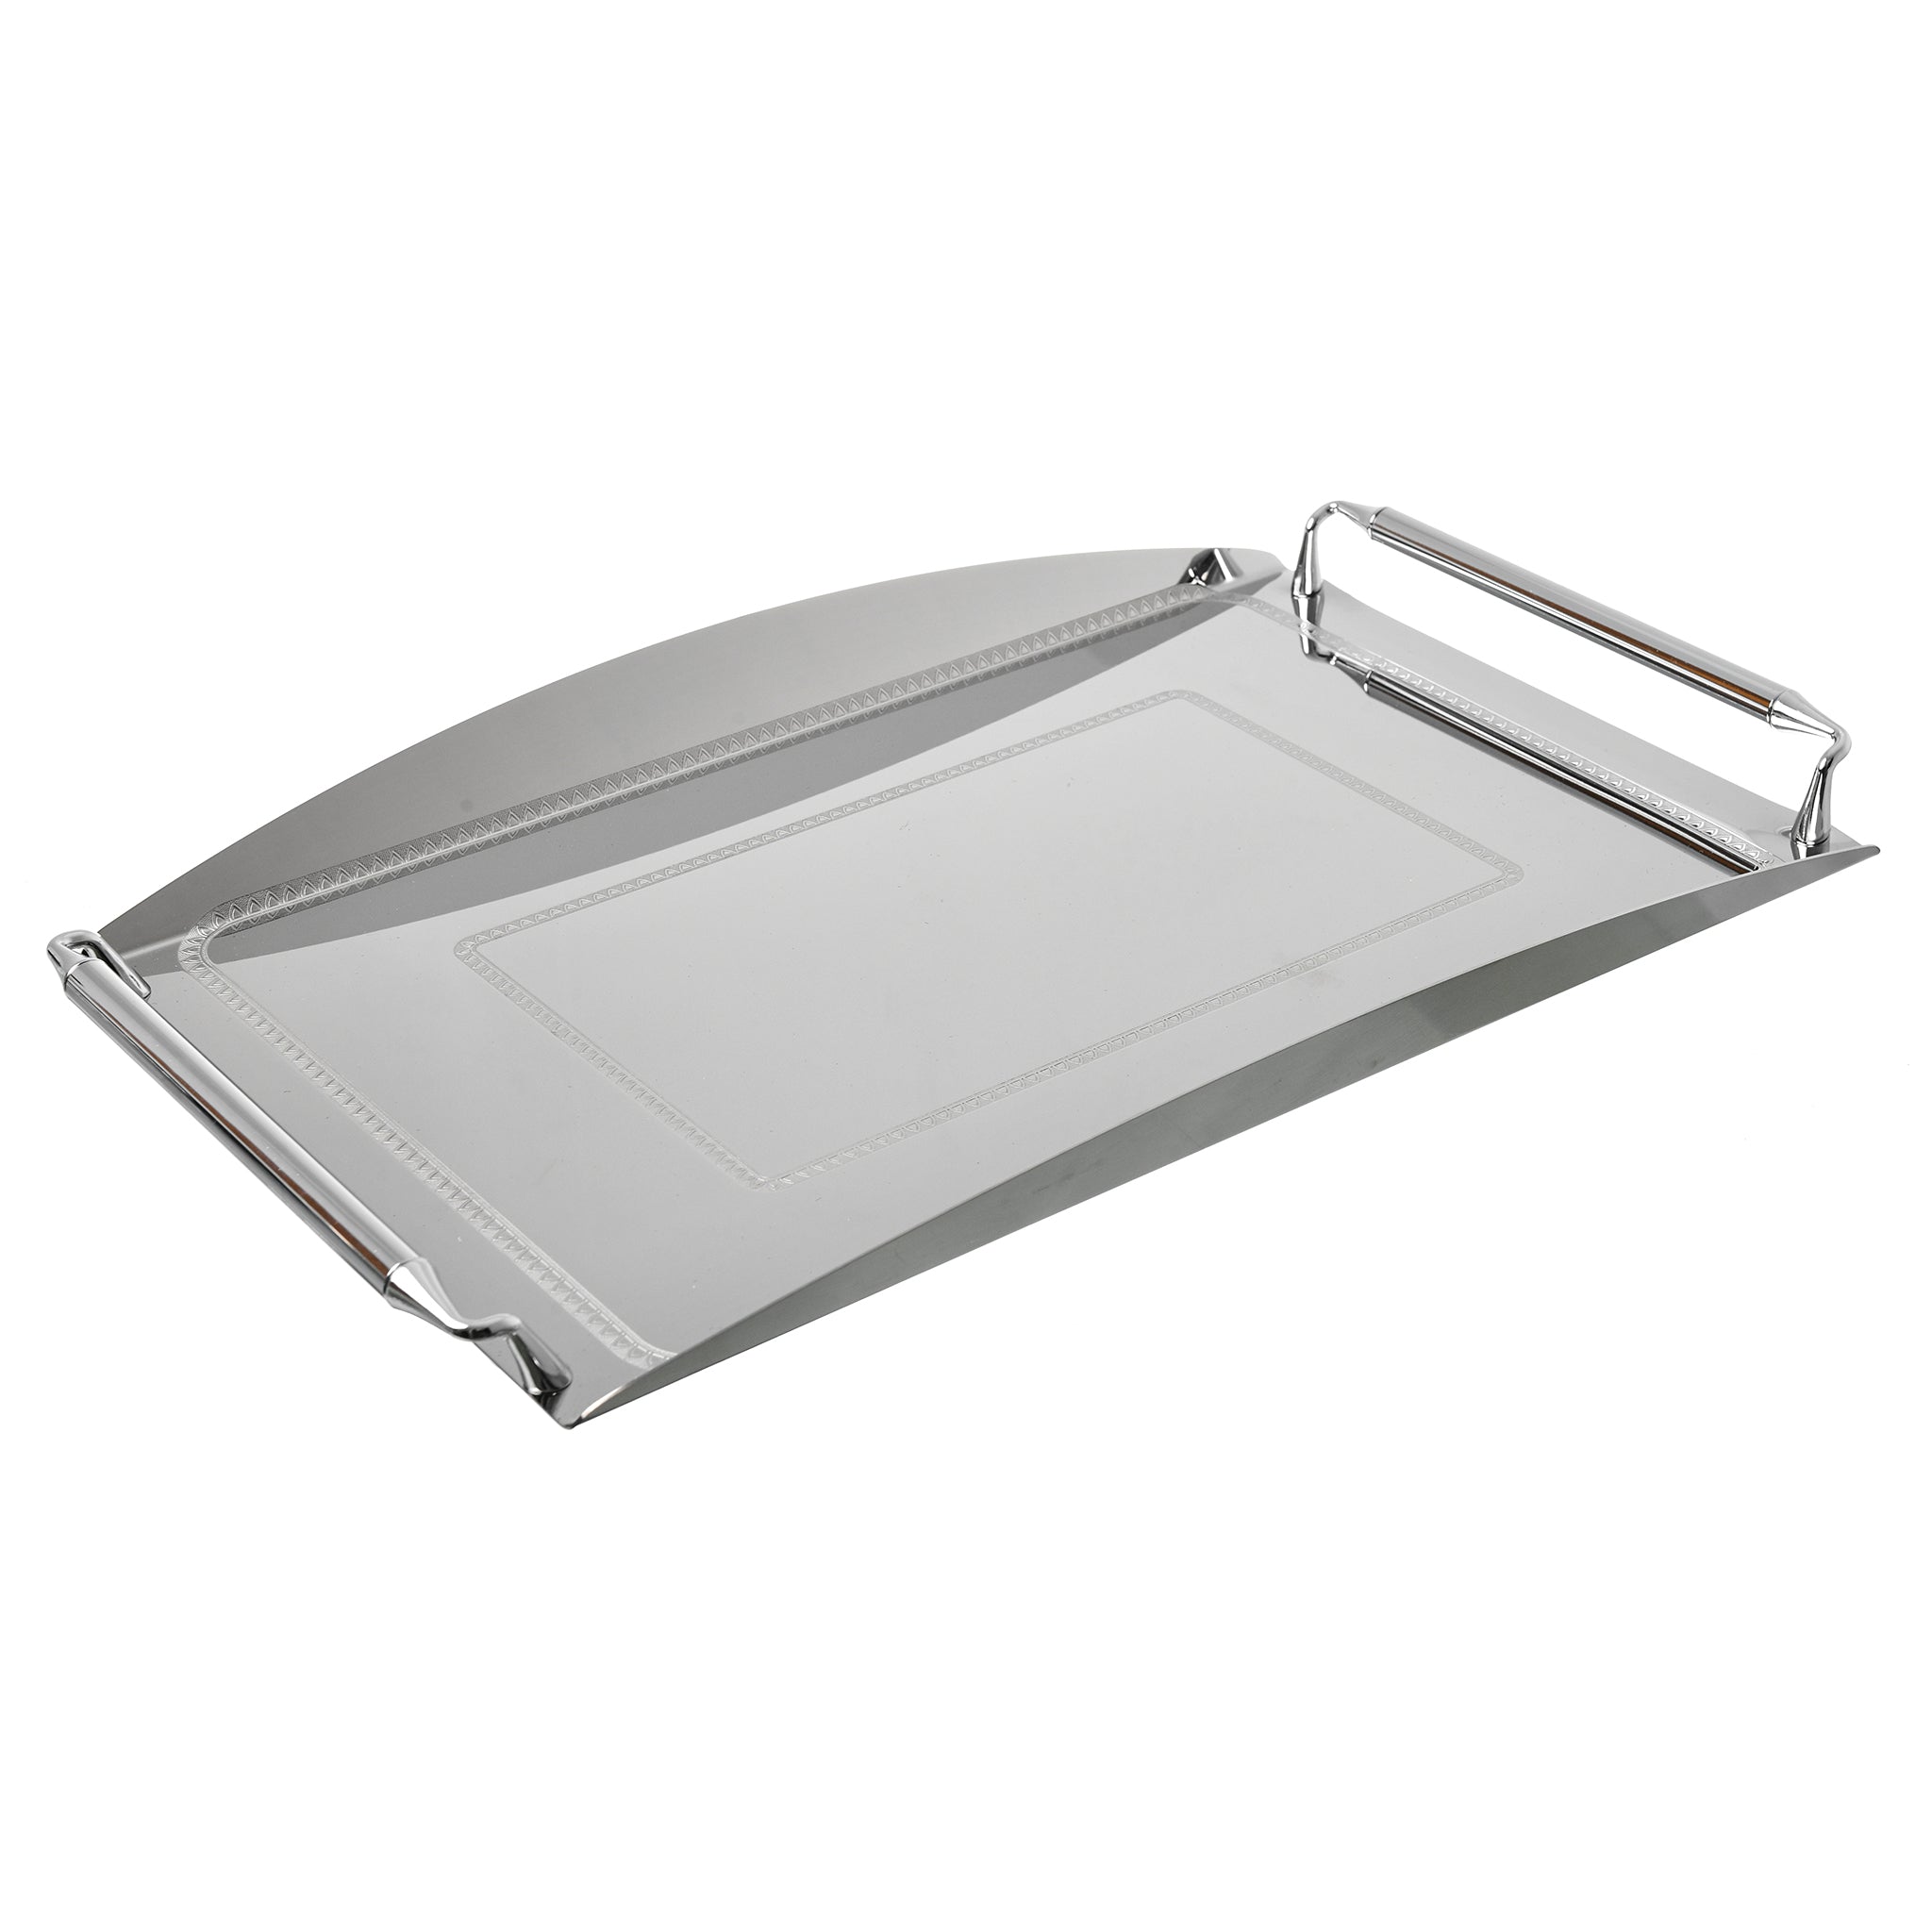 Elegant Gioiel - Rectangular Tray with Handles - Stainless Steel 18/10 - 35x50cm - 75000490